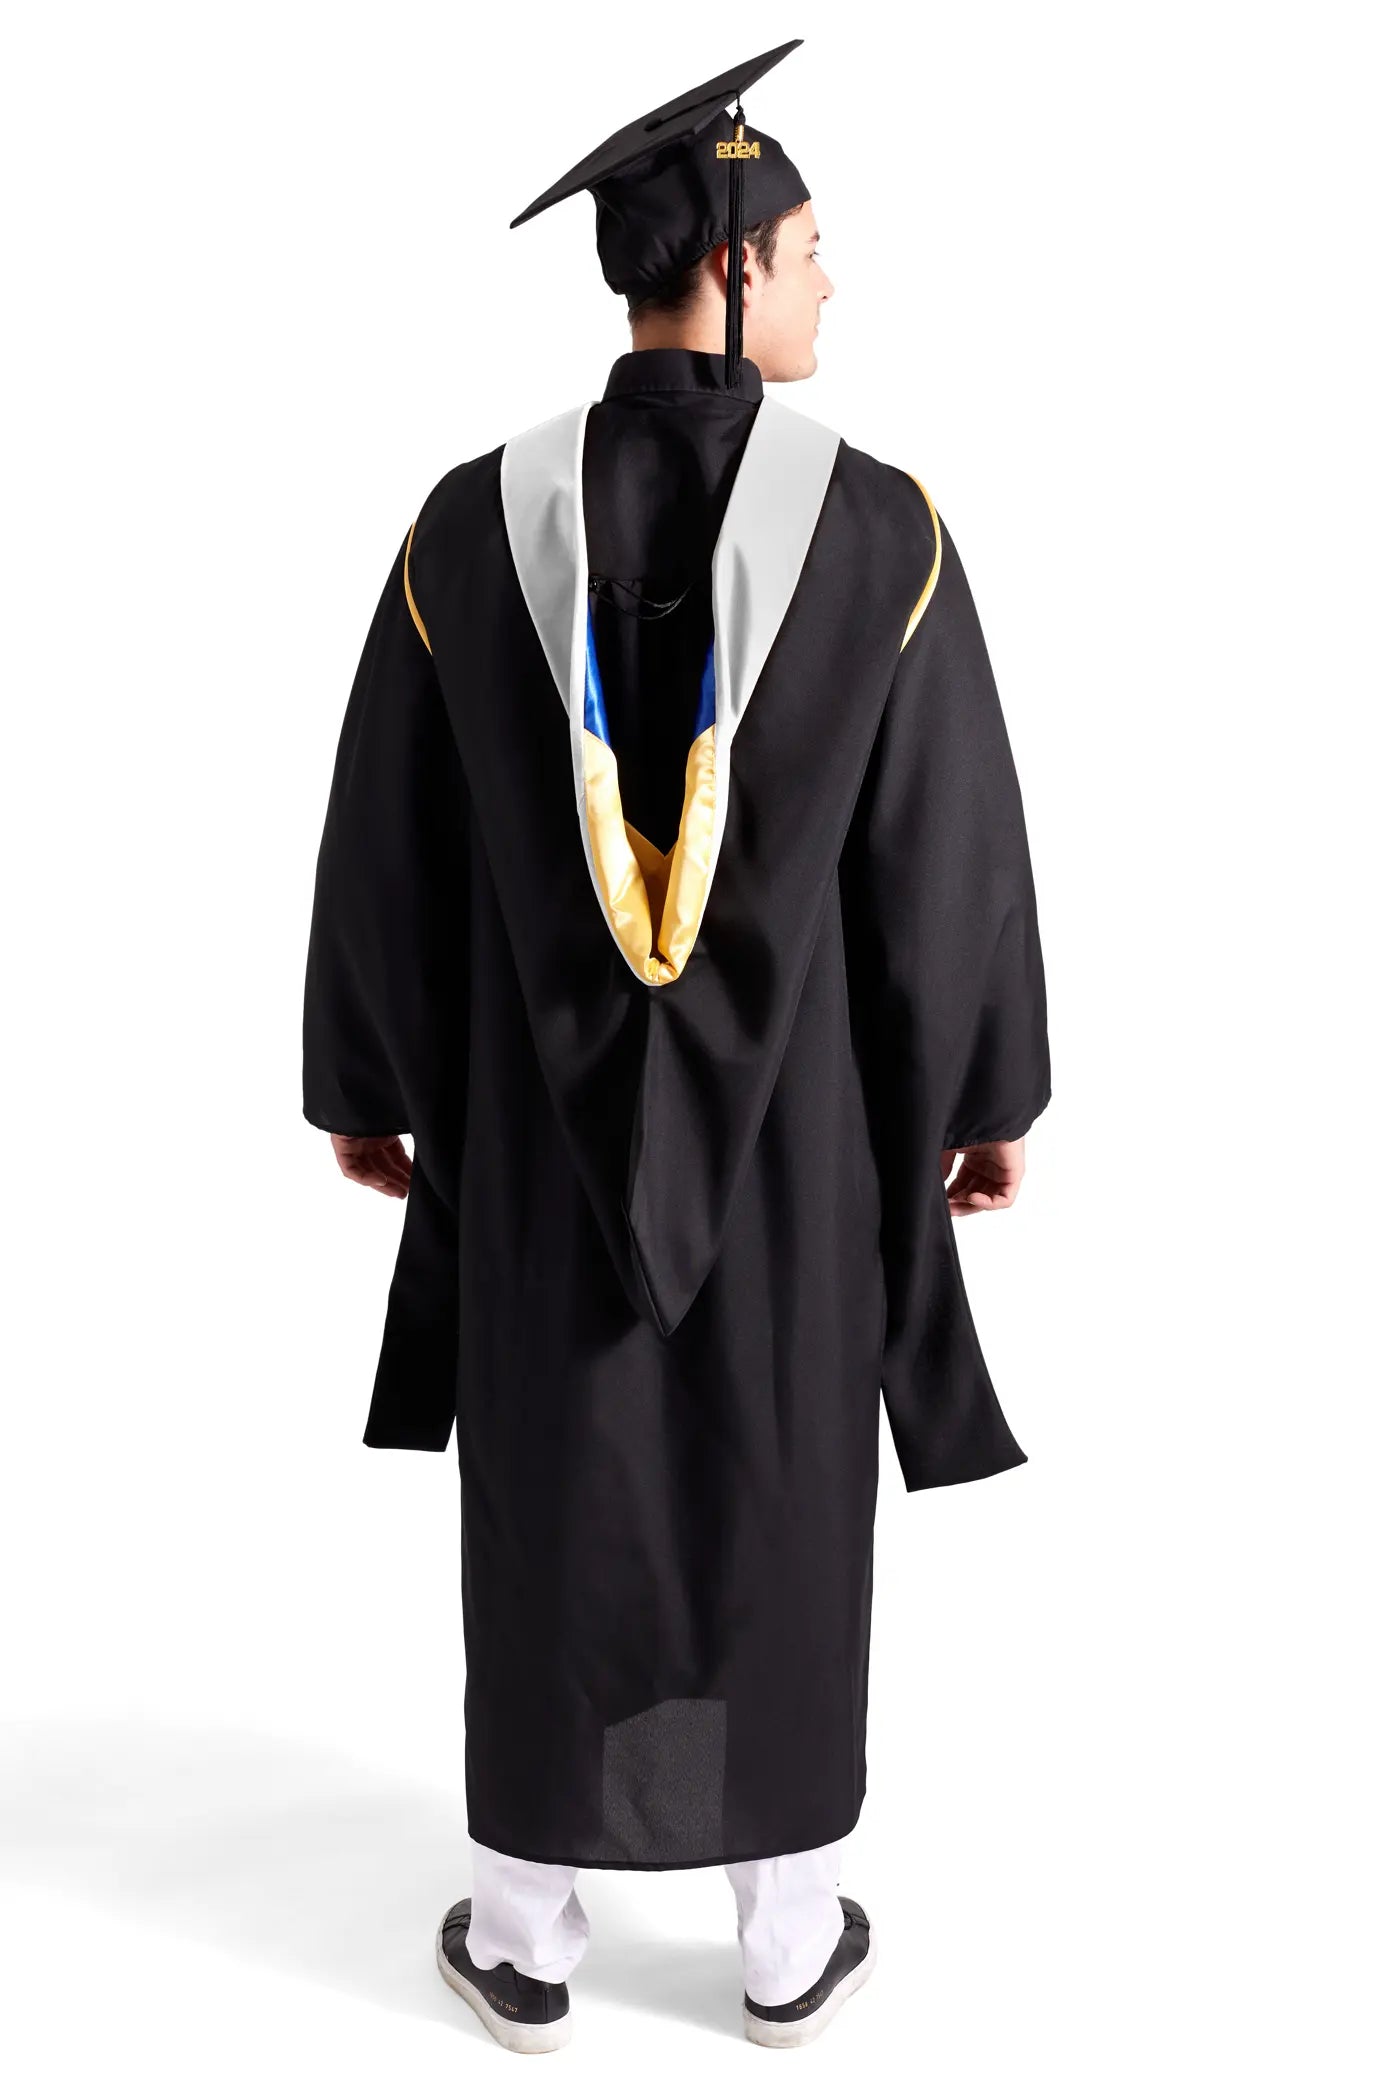 HAPPY TASSEL | UC Riverside Master's Regalia Set, include master's gown with pockets, mortarboard cap, white hood, and tassel with year charm. | College of Humanities, Arts, and Social Sciences Degrees